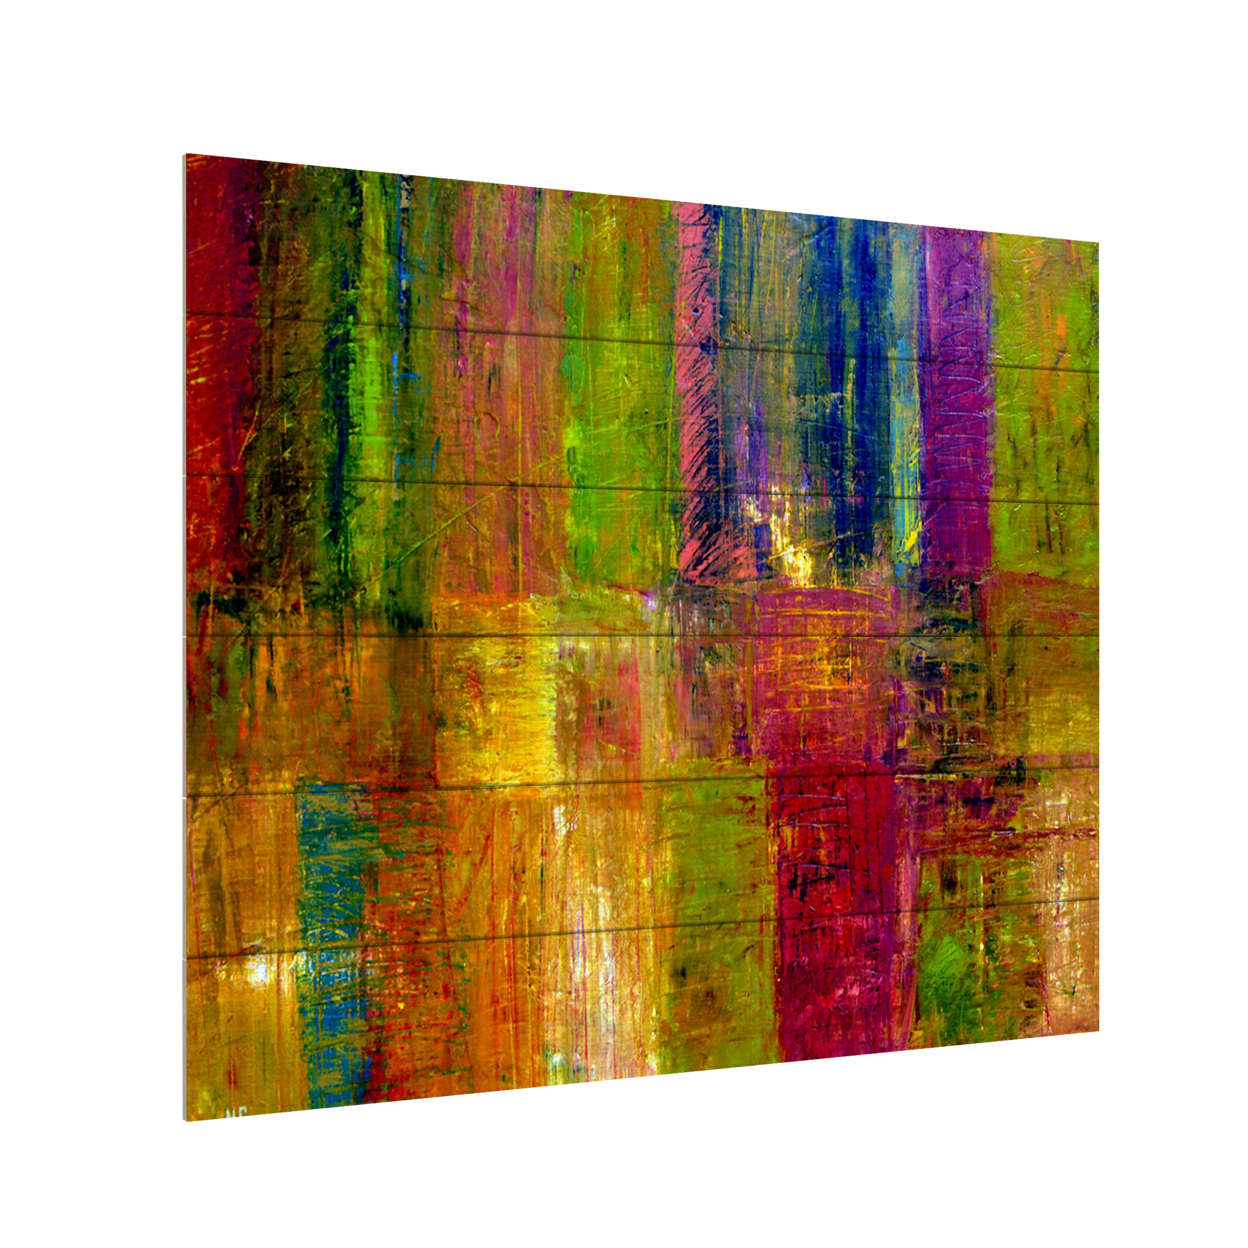 Wooden Slat Art 18 X 22 Inches Titled Color Abstract Ready To Hang Home Decor Picture